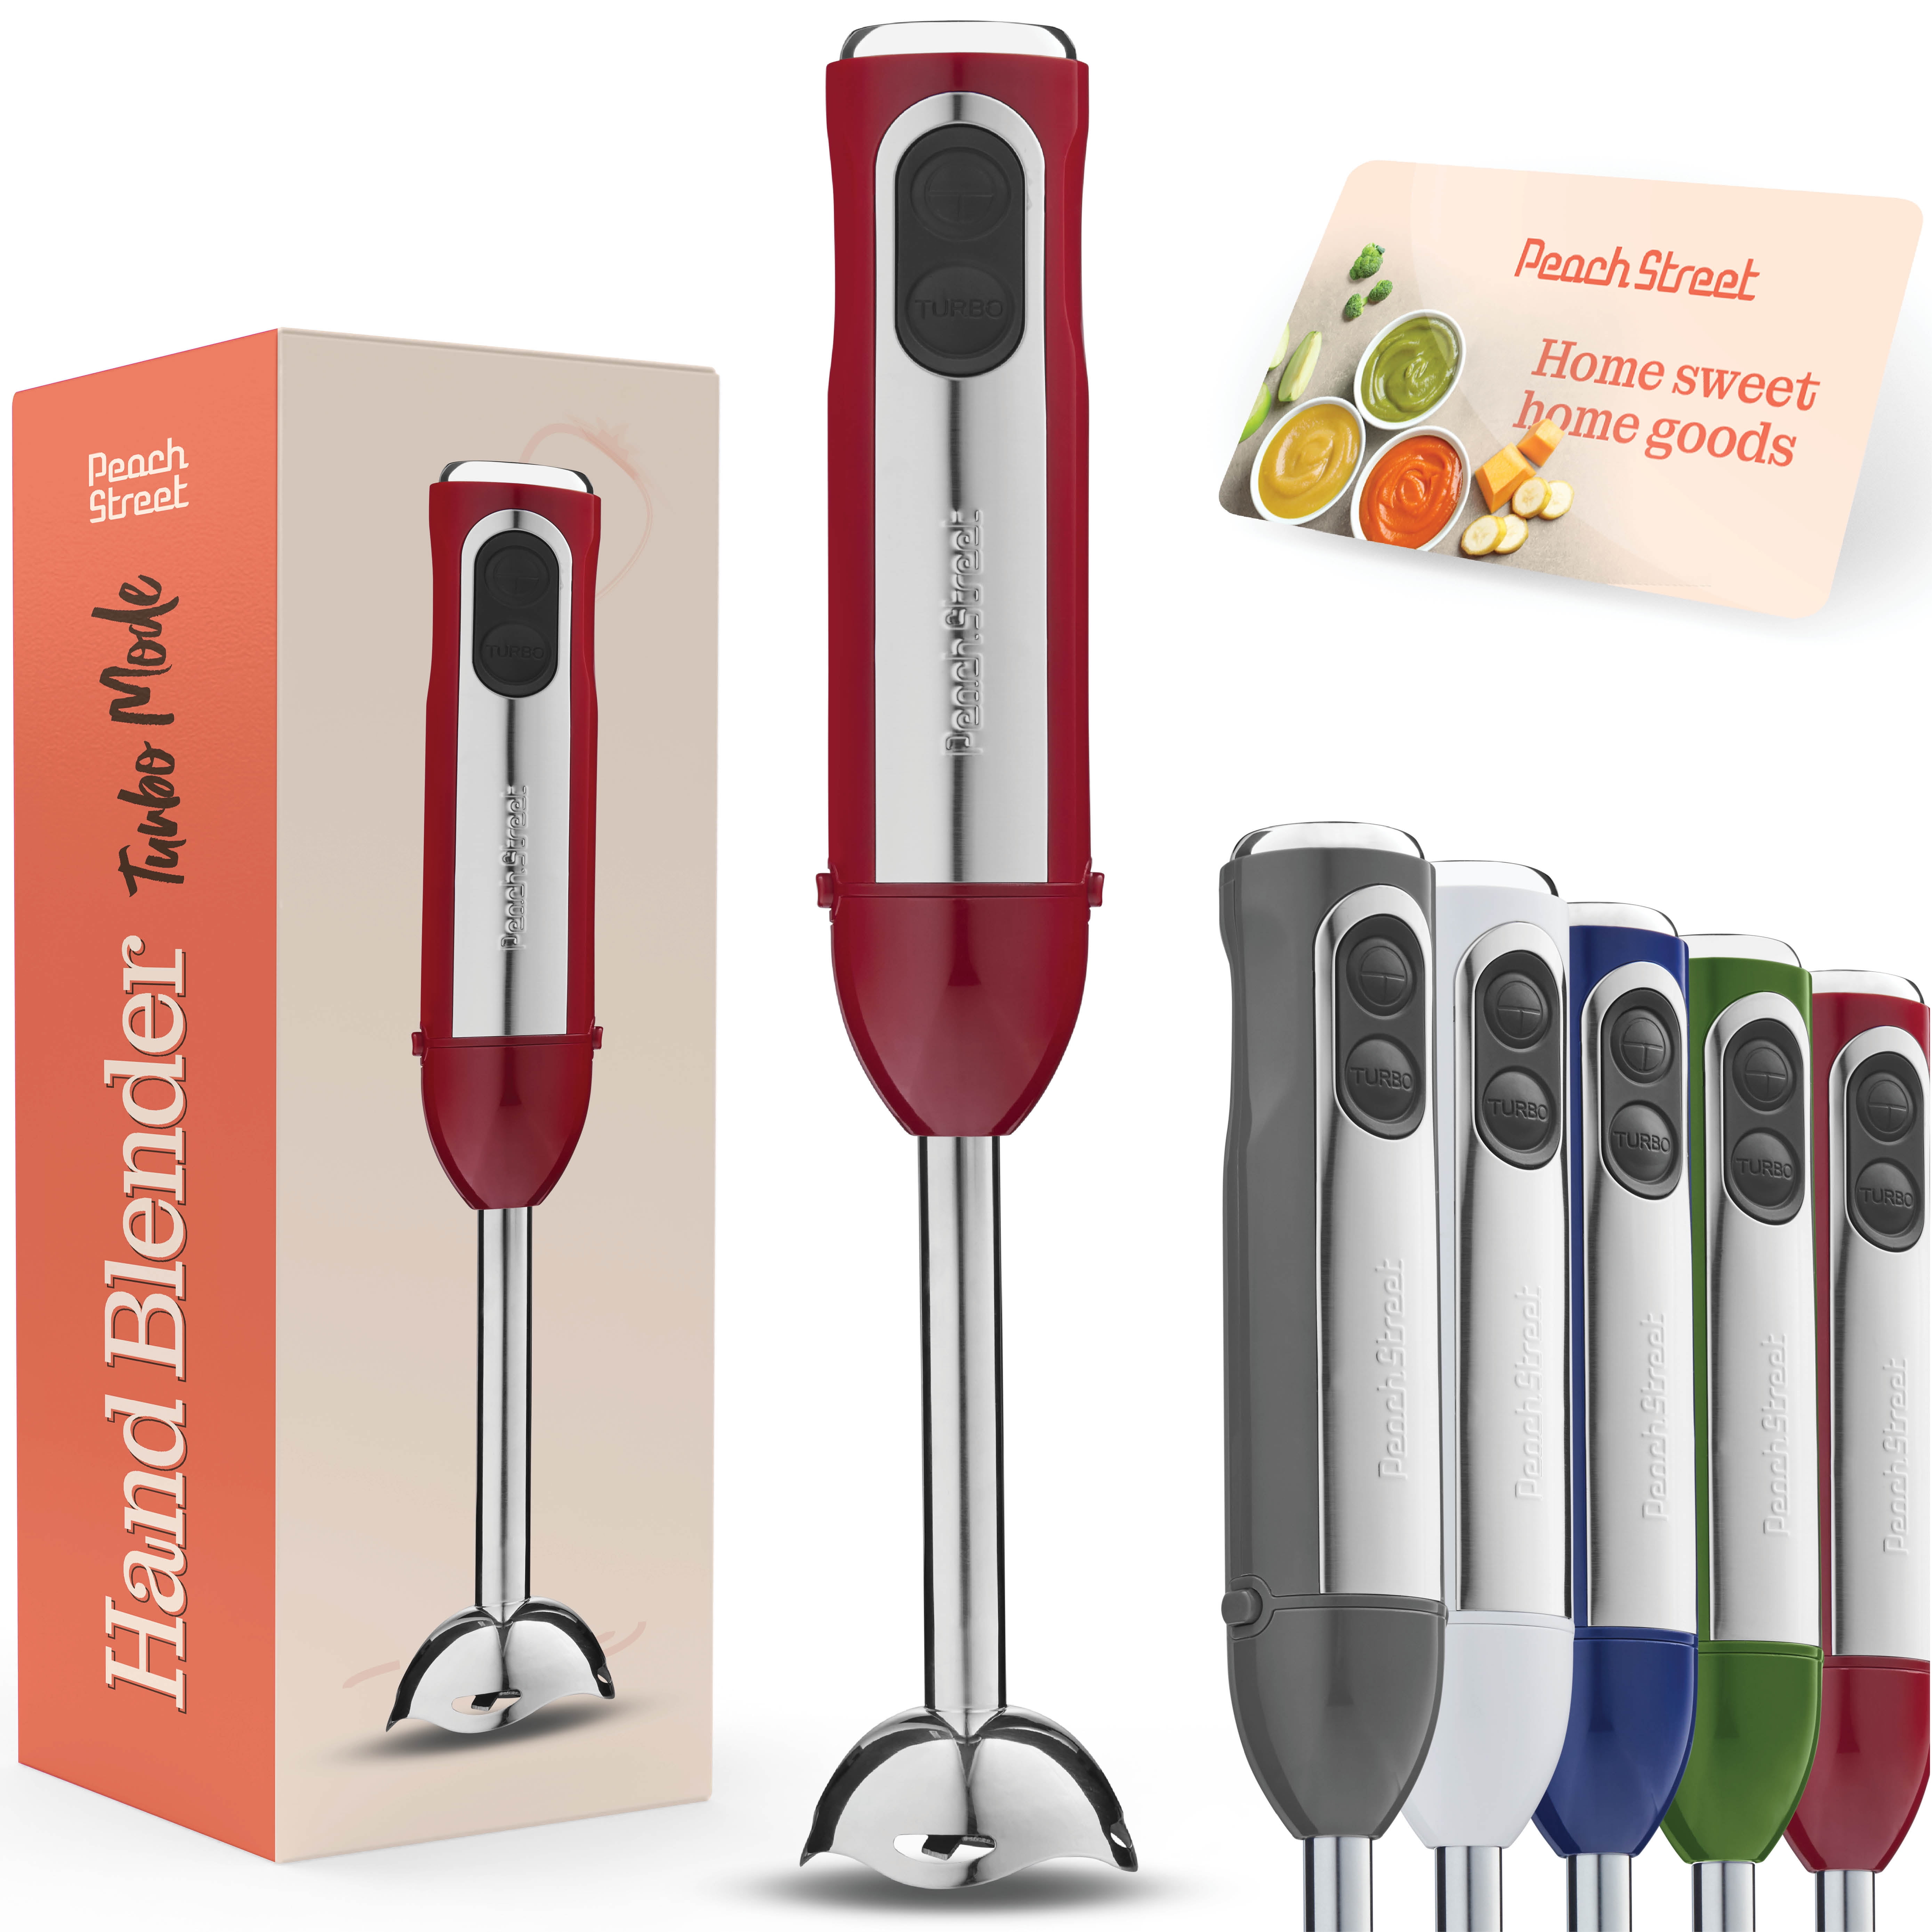 Zulay Kitchen Immersion Hand Blender 500W - Red, 1 - Fry's Food Stores